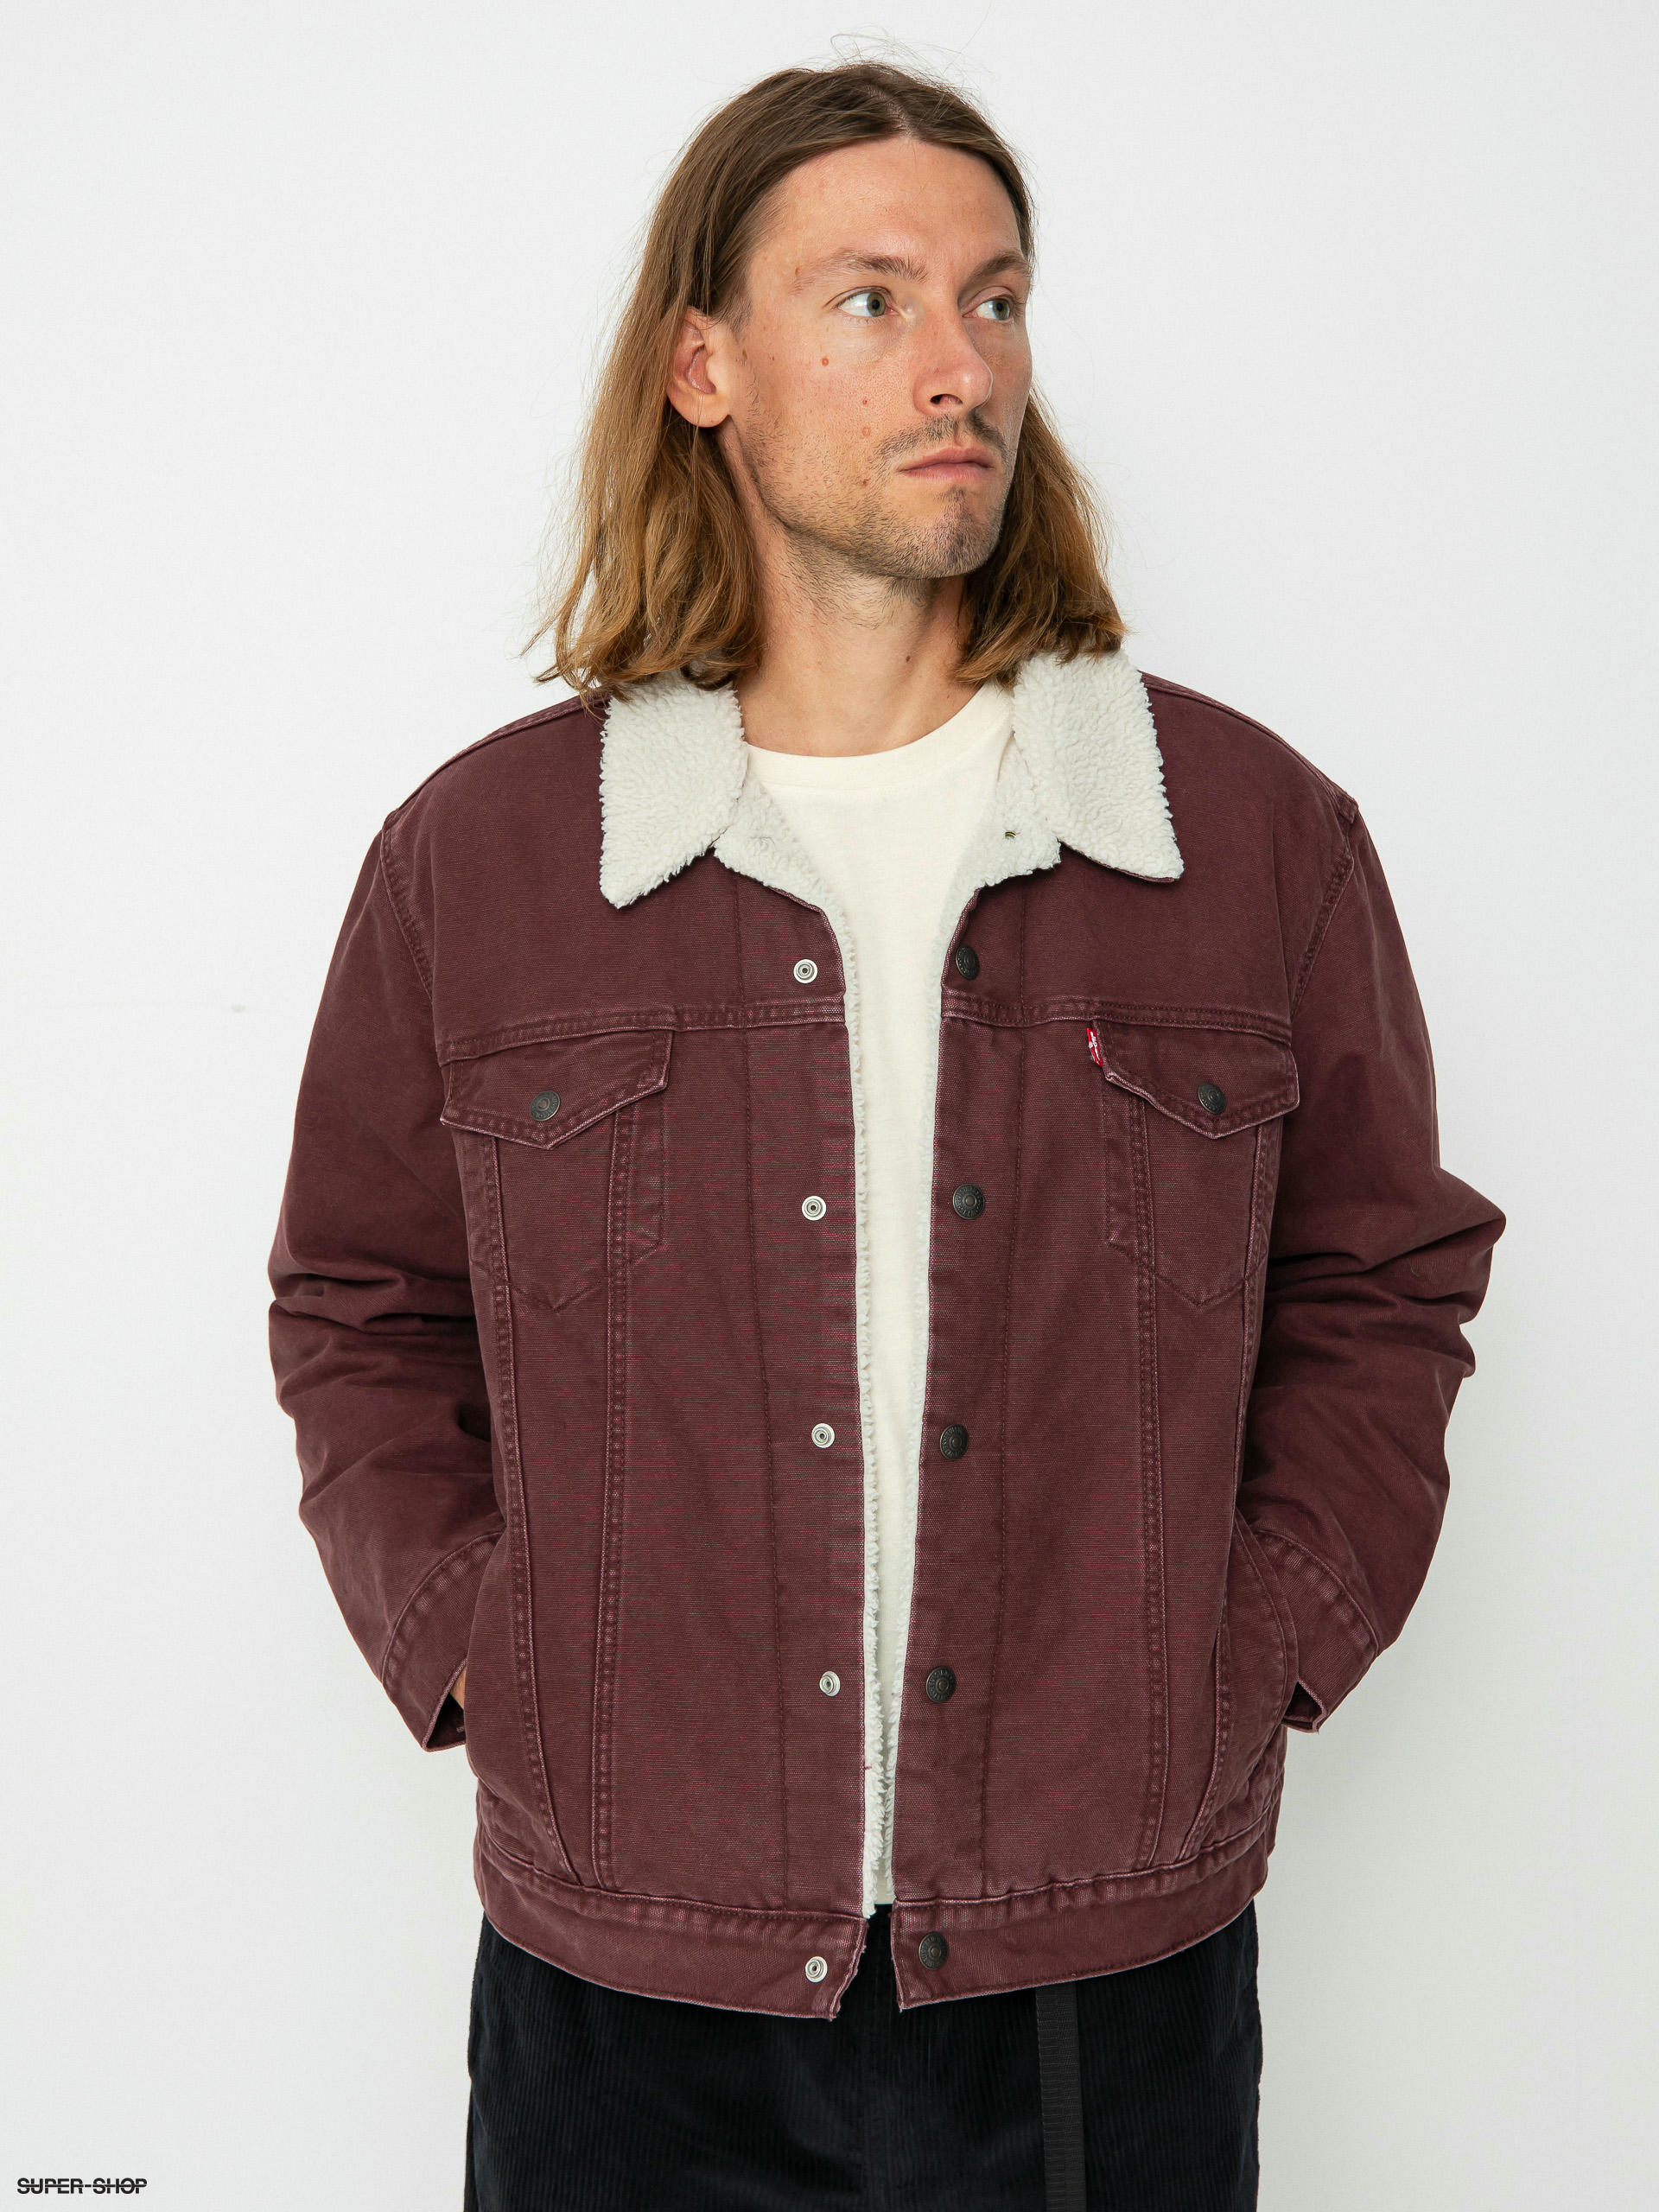 Buy Levi's Type 3 Sherpa Trucker Jacket Vintage Fit multi/color from £60.00  (Today) – Best Deals on idealo.co.uk